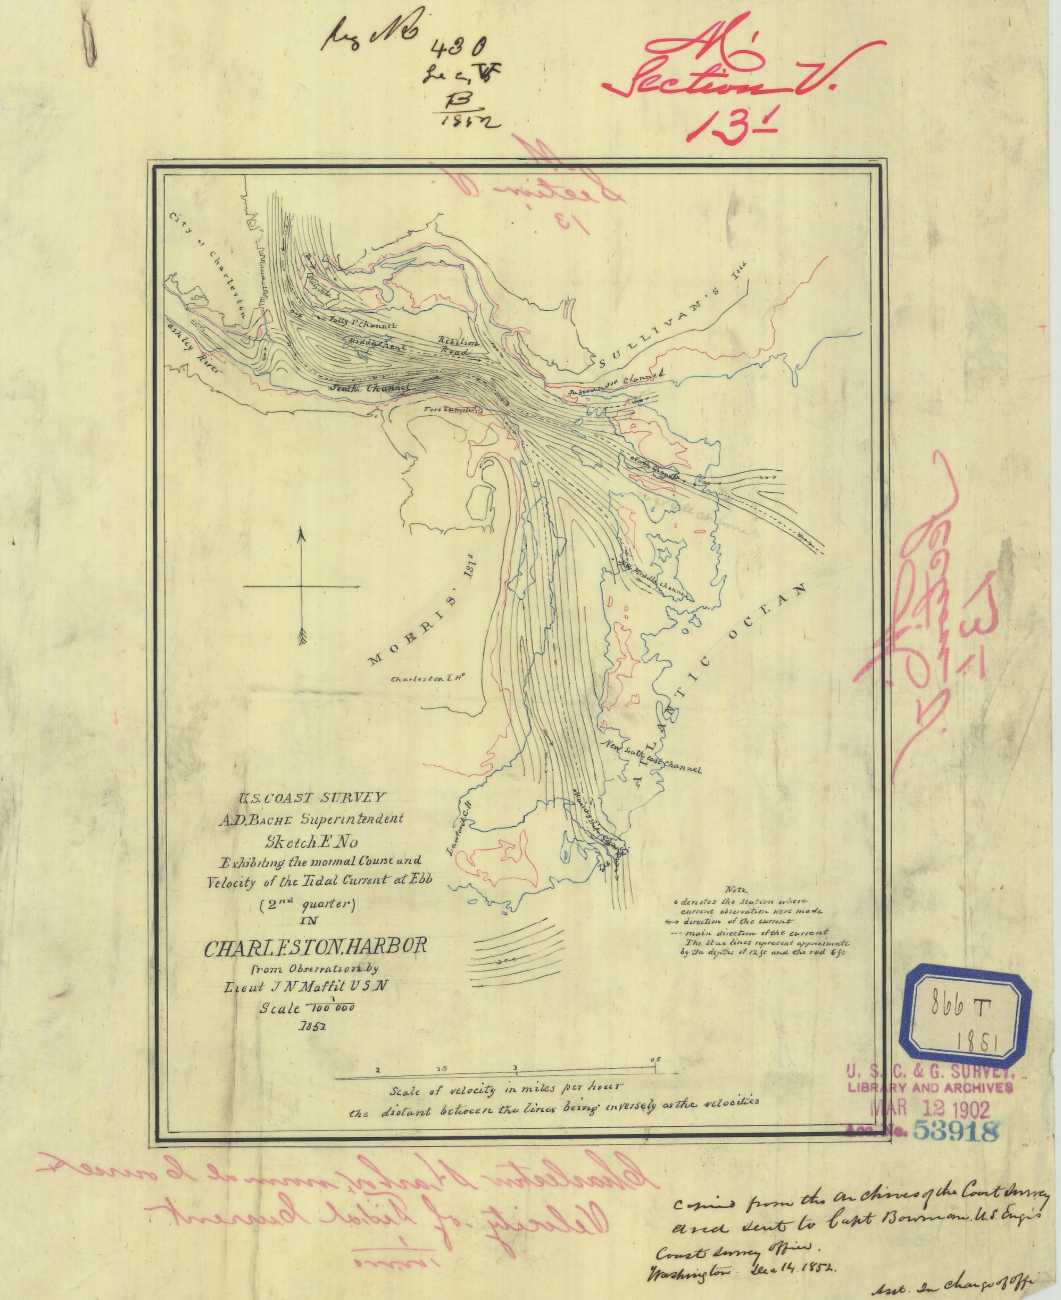 Hand sketch Exhibiting the normal course and velocity of the tidal current atebb for the 2nd Quarter (of the moon) in Charleston Harbor by Lieut